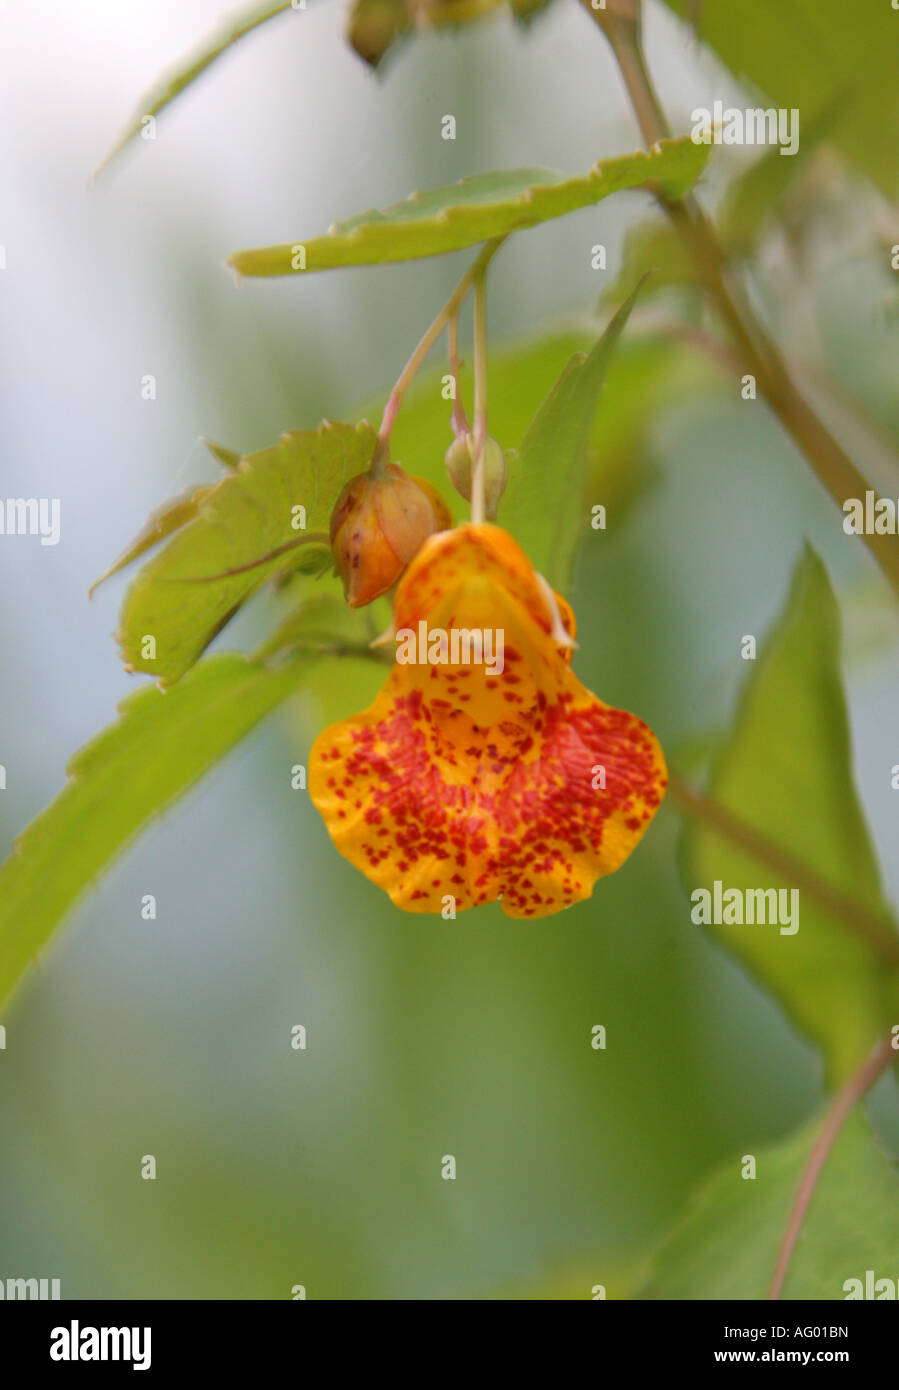 Orange Balsam, Impatiens capensis, Balsaminaceae, aka Jewelled Balsam or Jewelweed or Spotted Touch Me Not Stock Photo